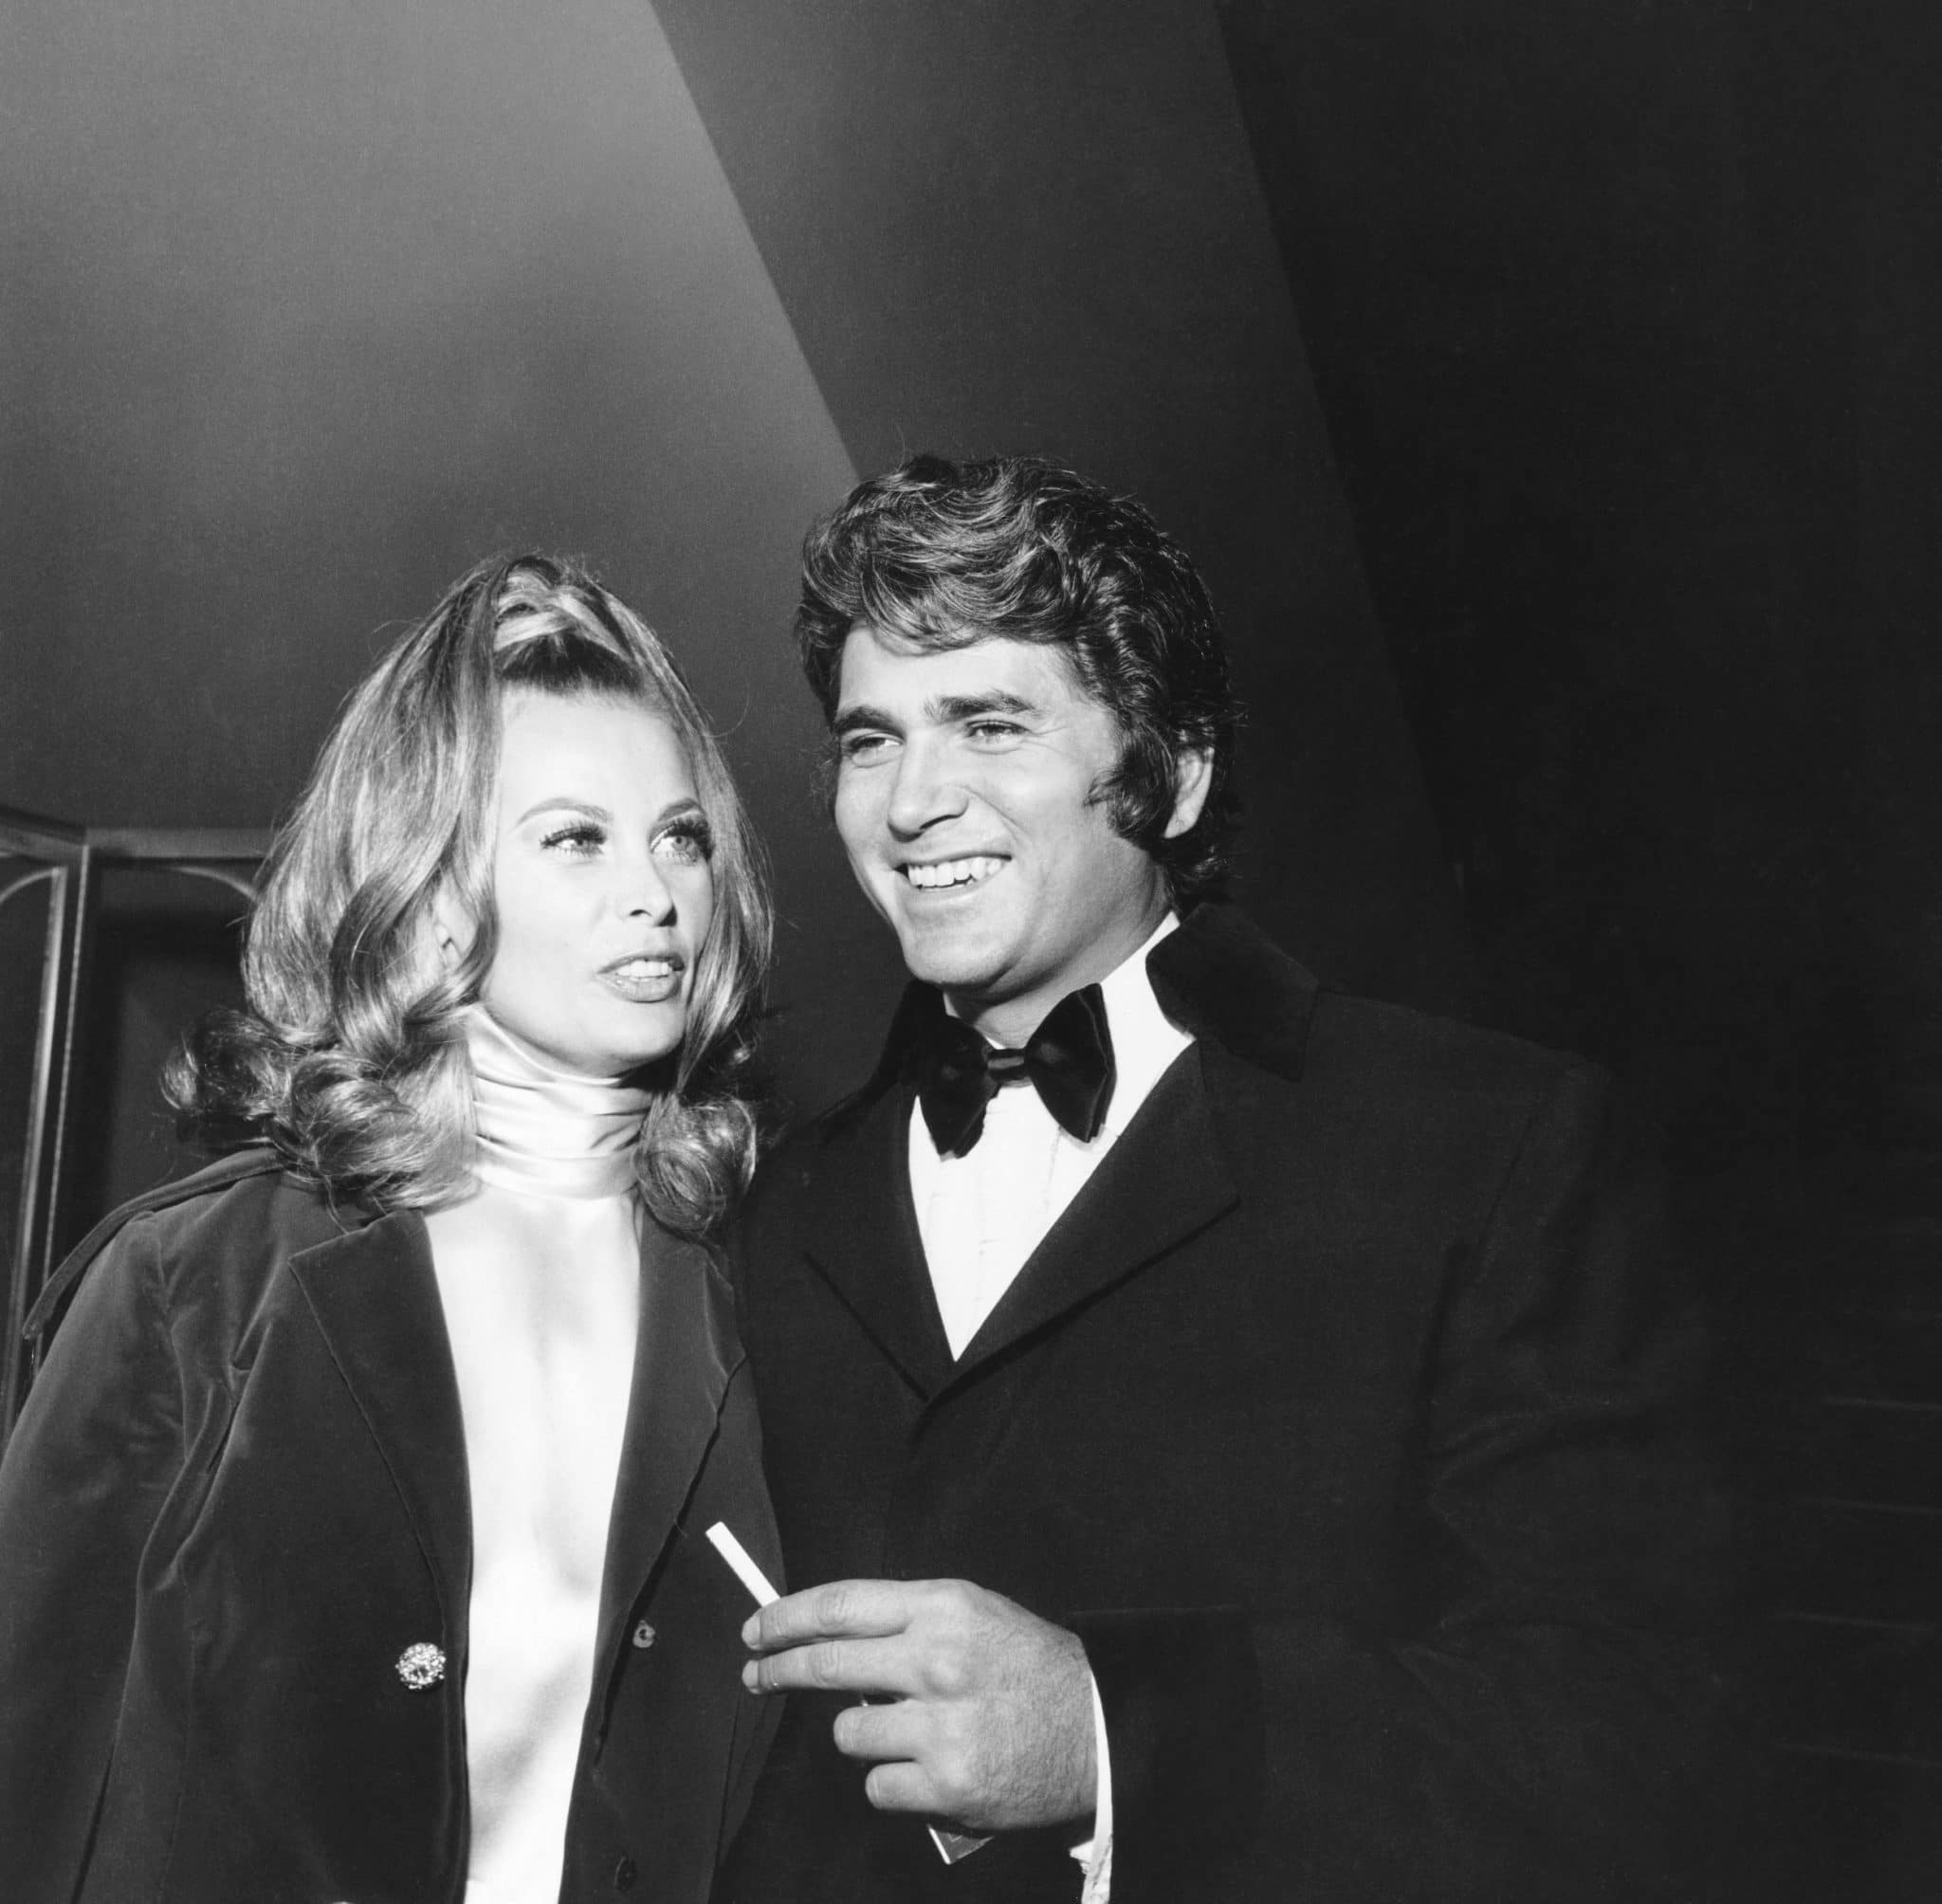 Michael Landon Said His Ex-Wife Was Happier After They Divorced